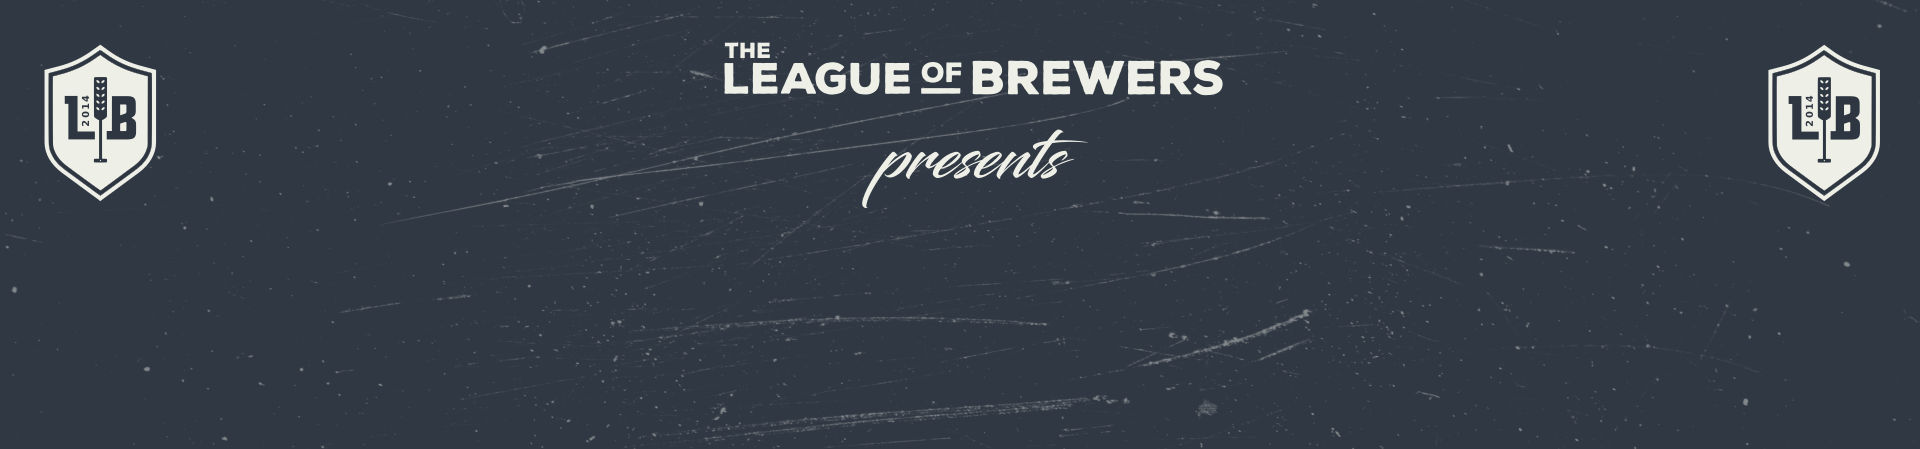 League of Brewers presents: Abandoned Brewery